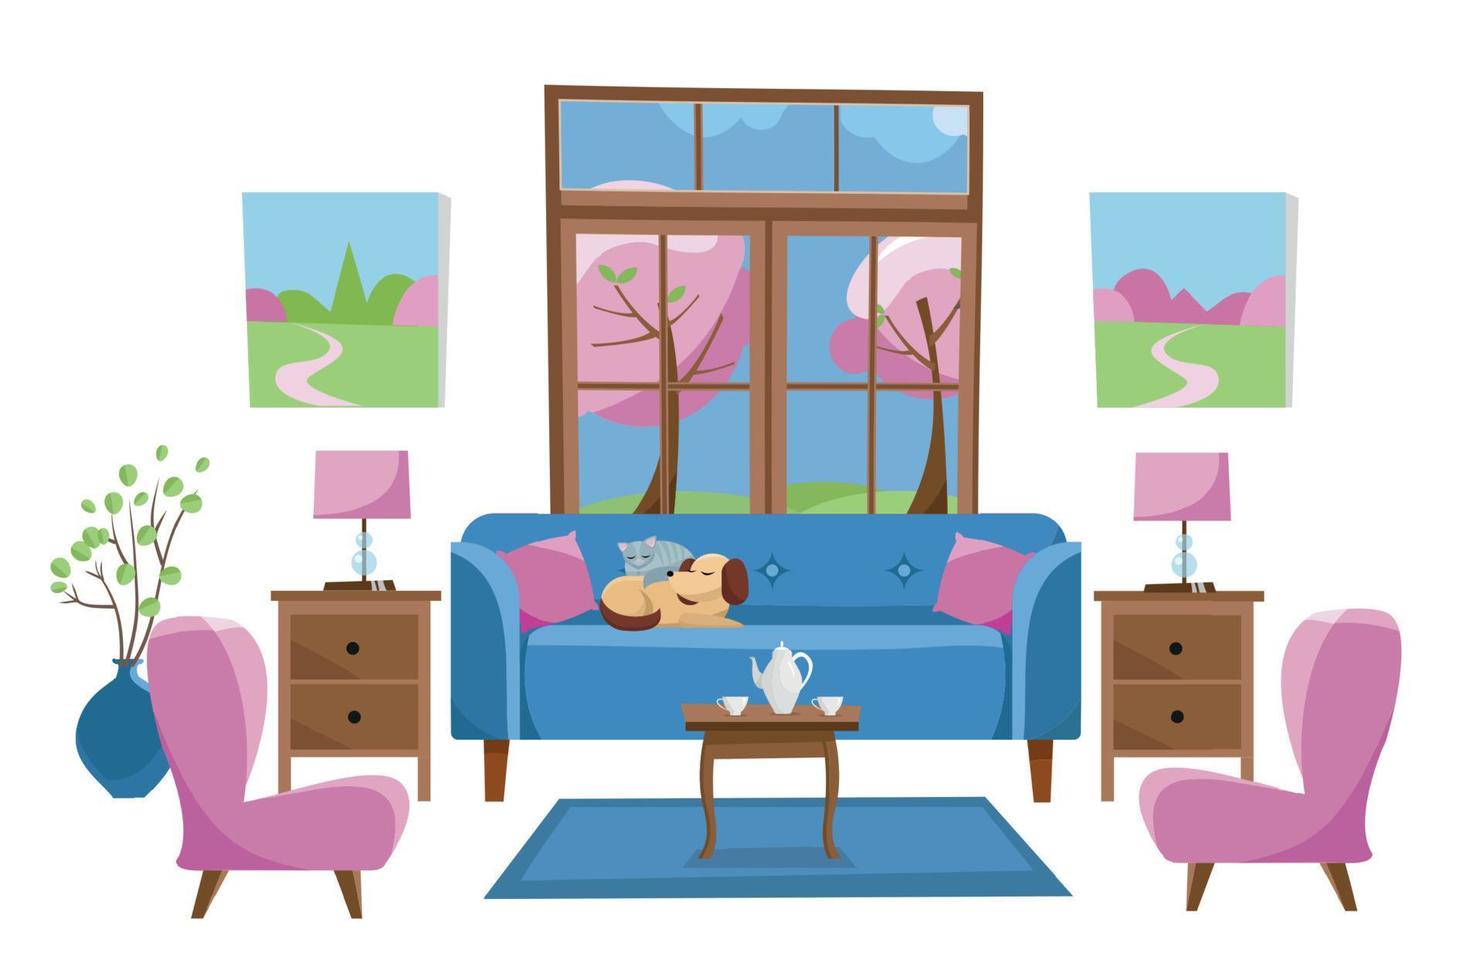 Living room furniture in bright colors on white background. Blue sofa with table, stands, lamps, carpet, porcelain set, soft chairs in room with large window. Outside spring trees. Flat cartoon vector